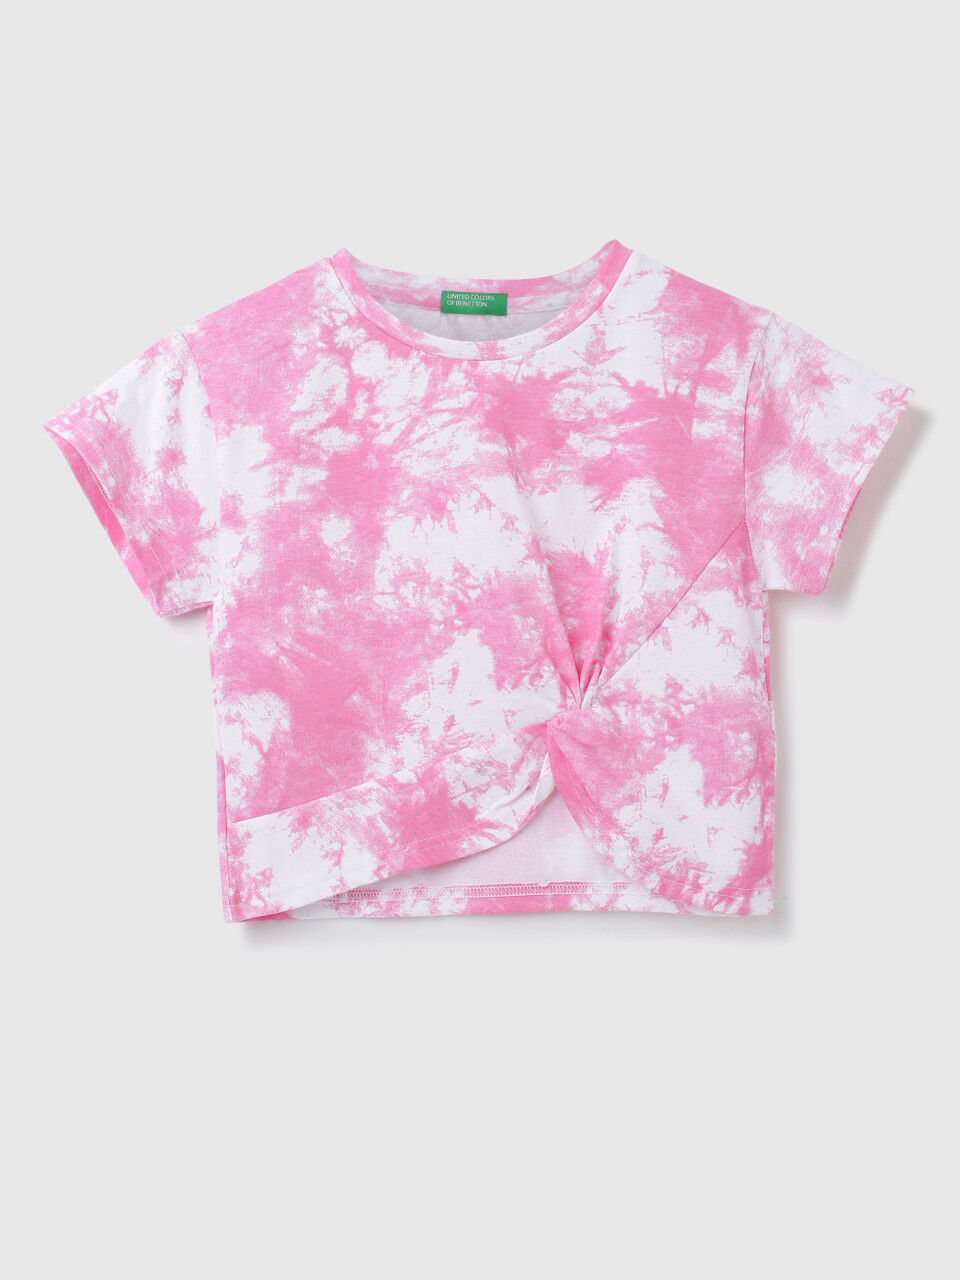 United Colors of Benetton Girls Tie & Dye Round Neck Top